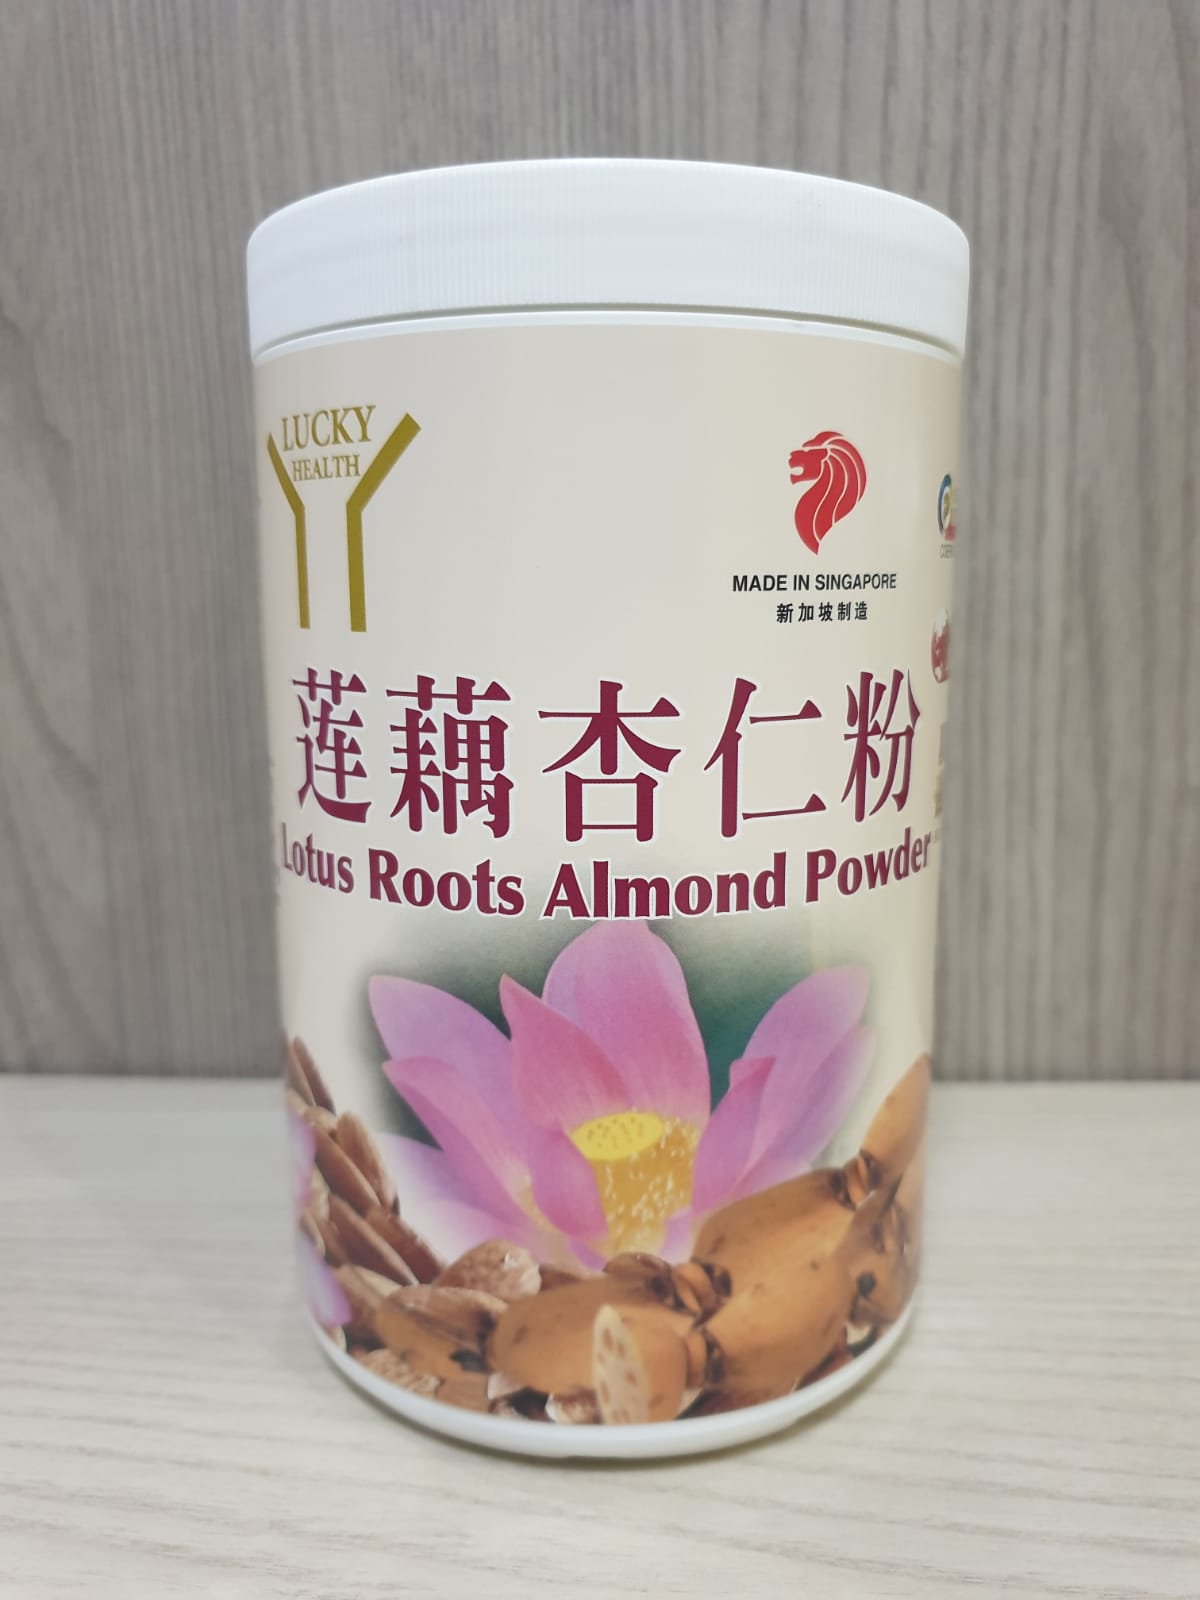 Lucky Health Lotus Roots Almond Powder